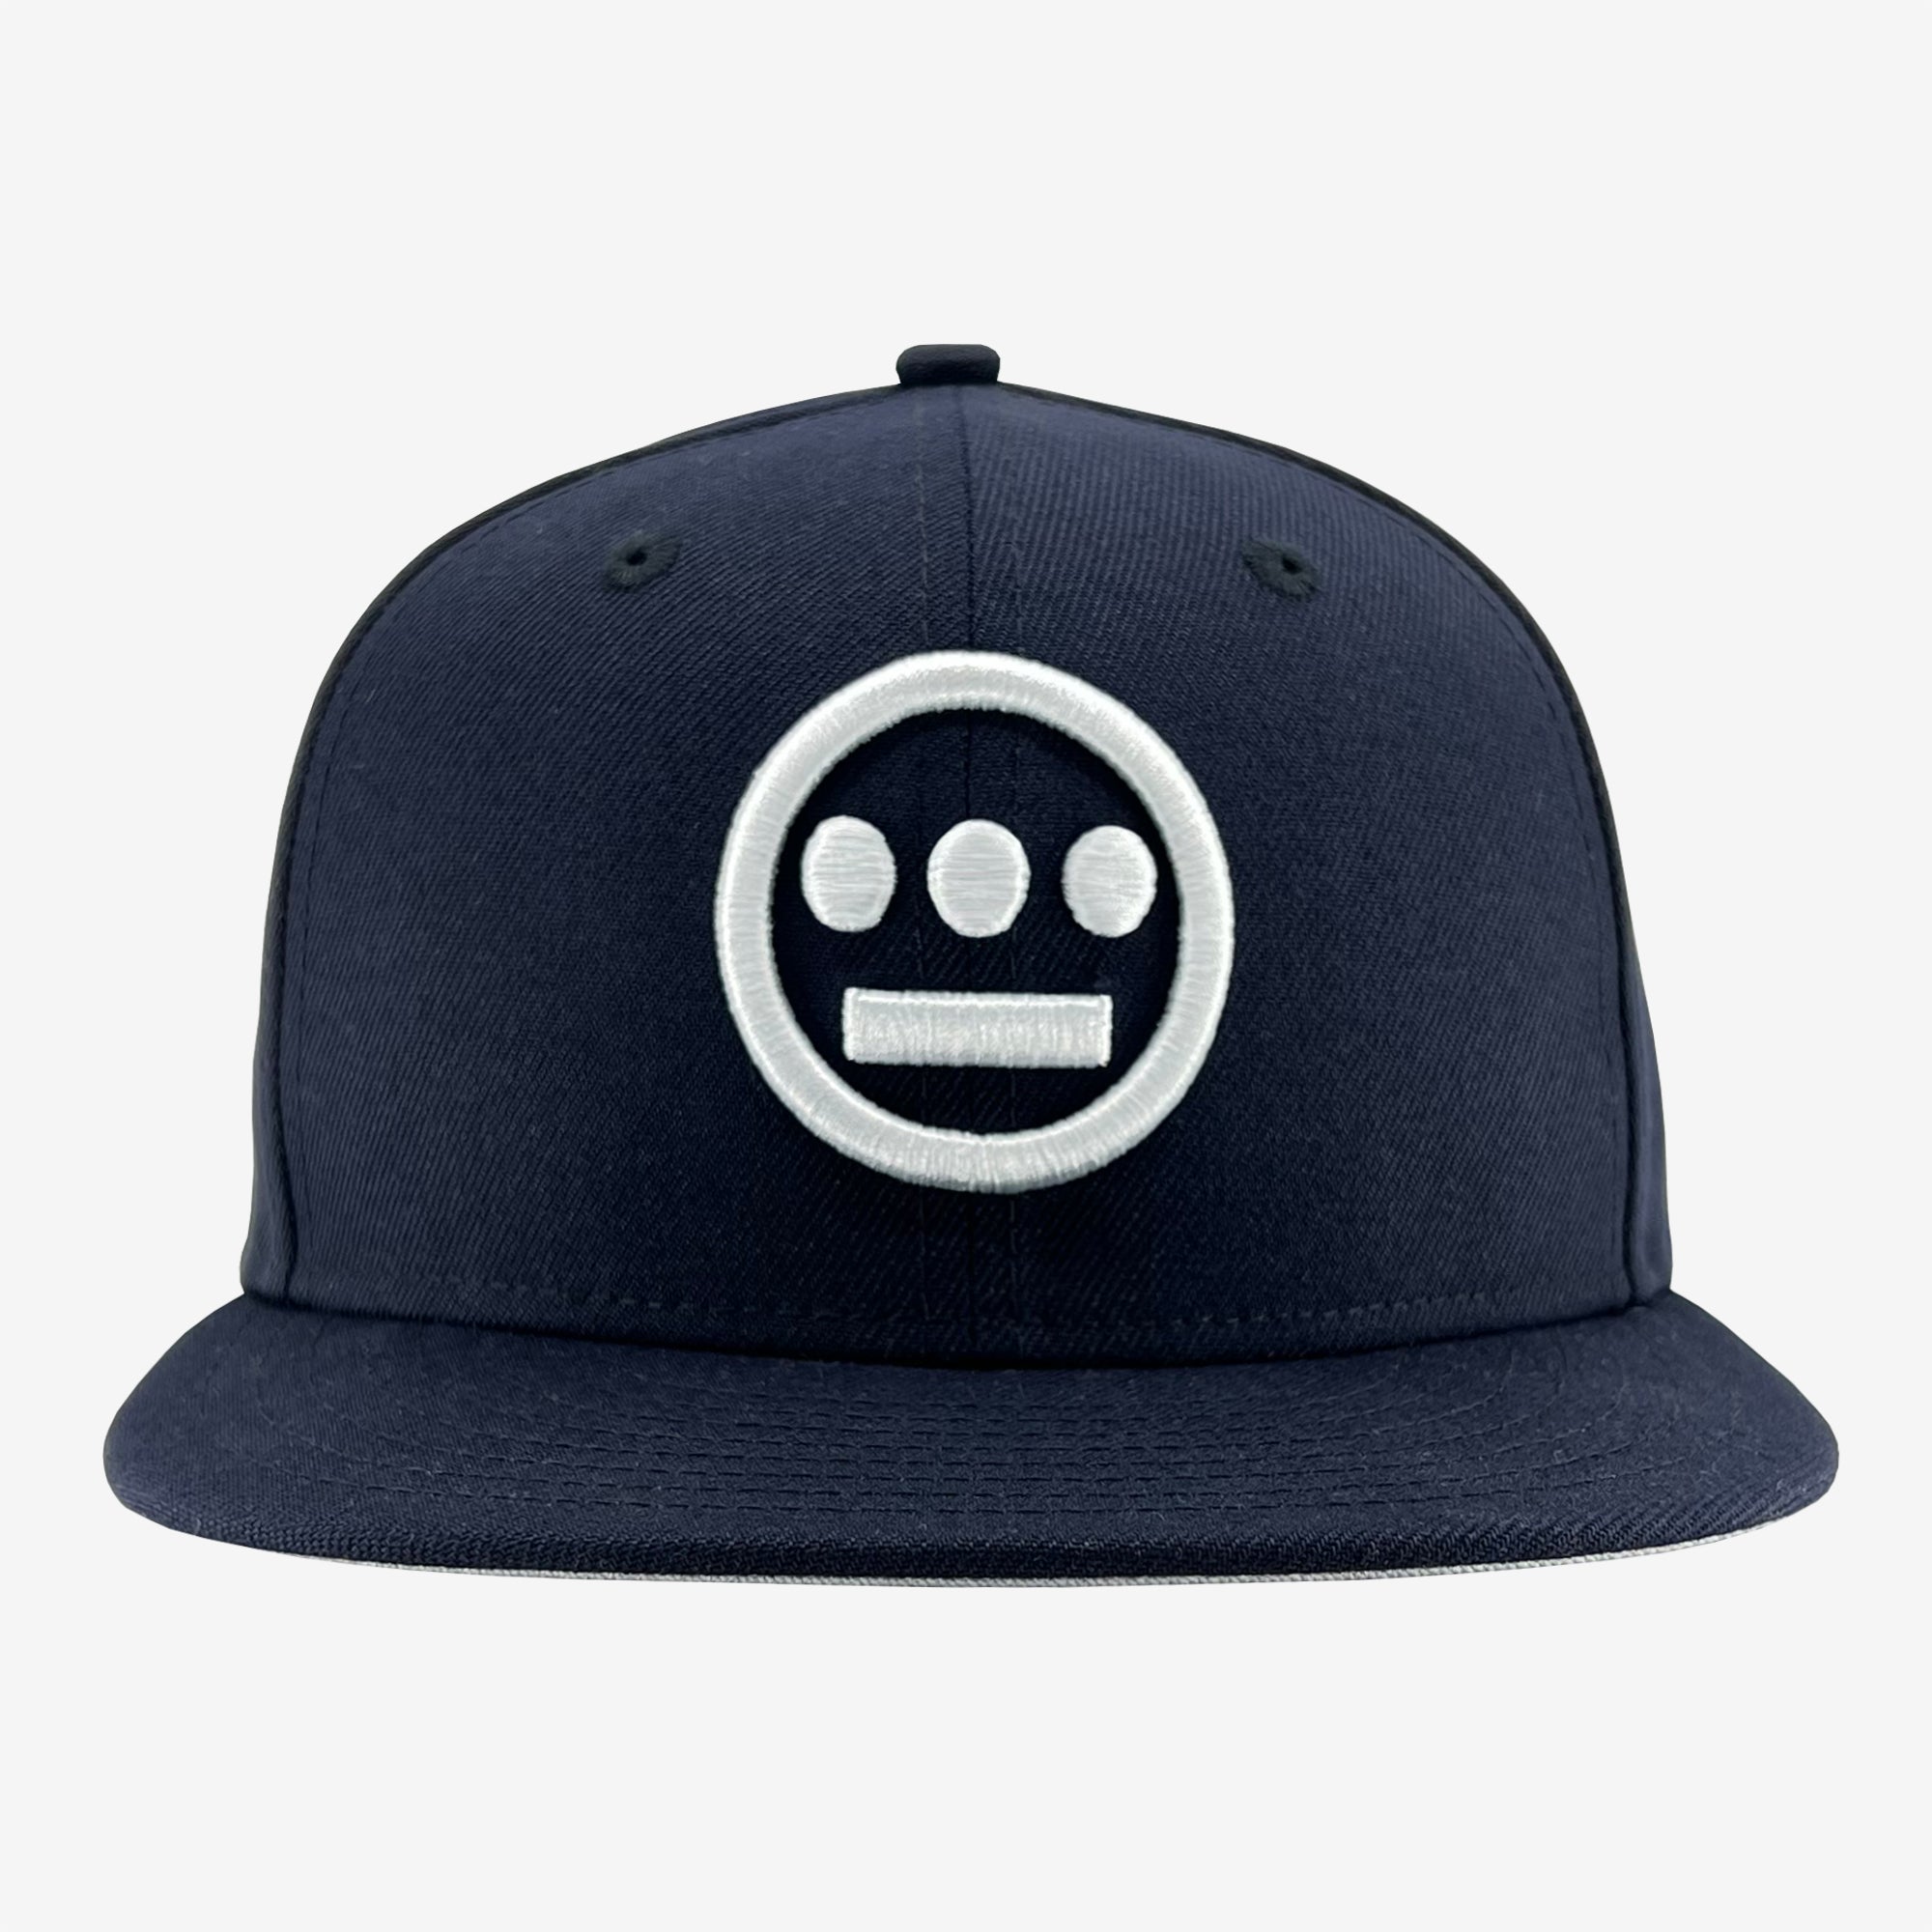 Front view of navy New Era cap with white embroidered Hieroglyphics hip-hop logo on the crown.